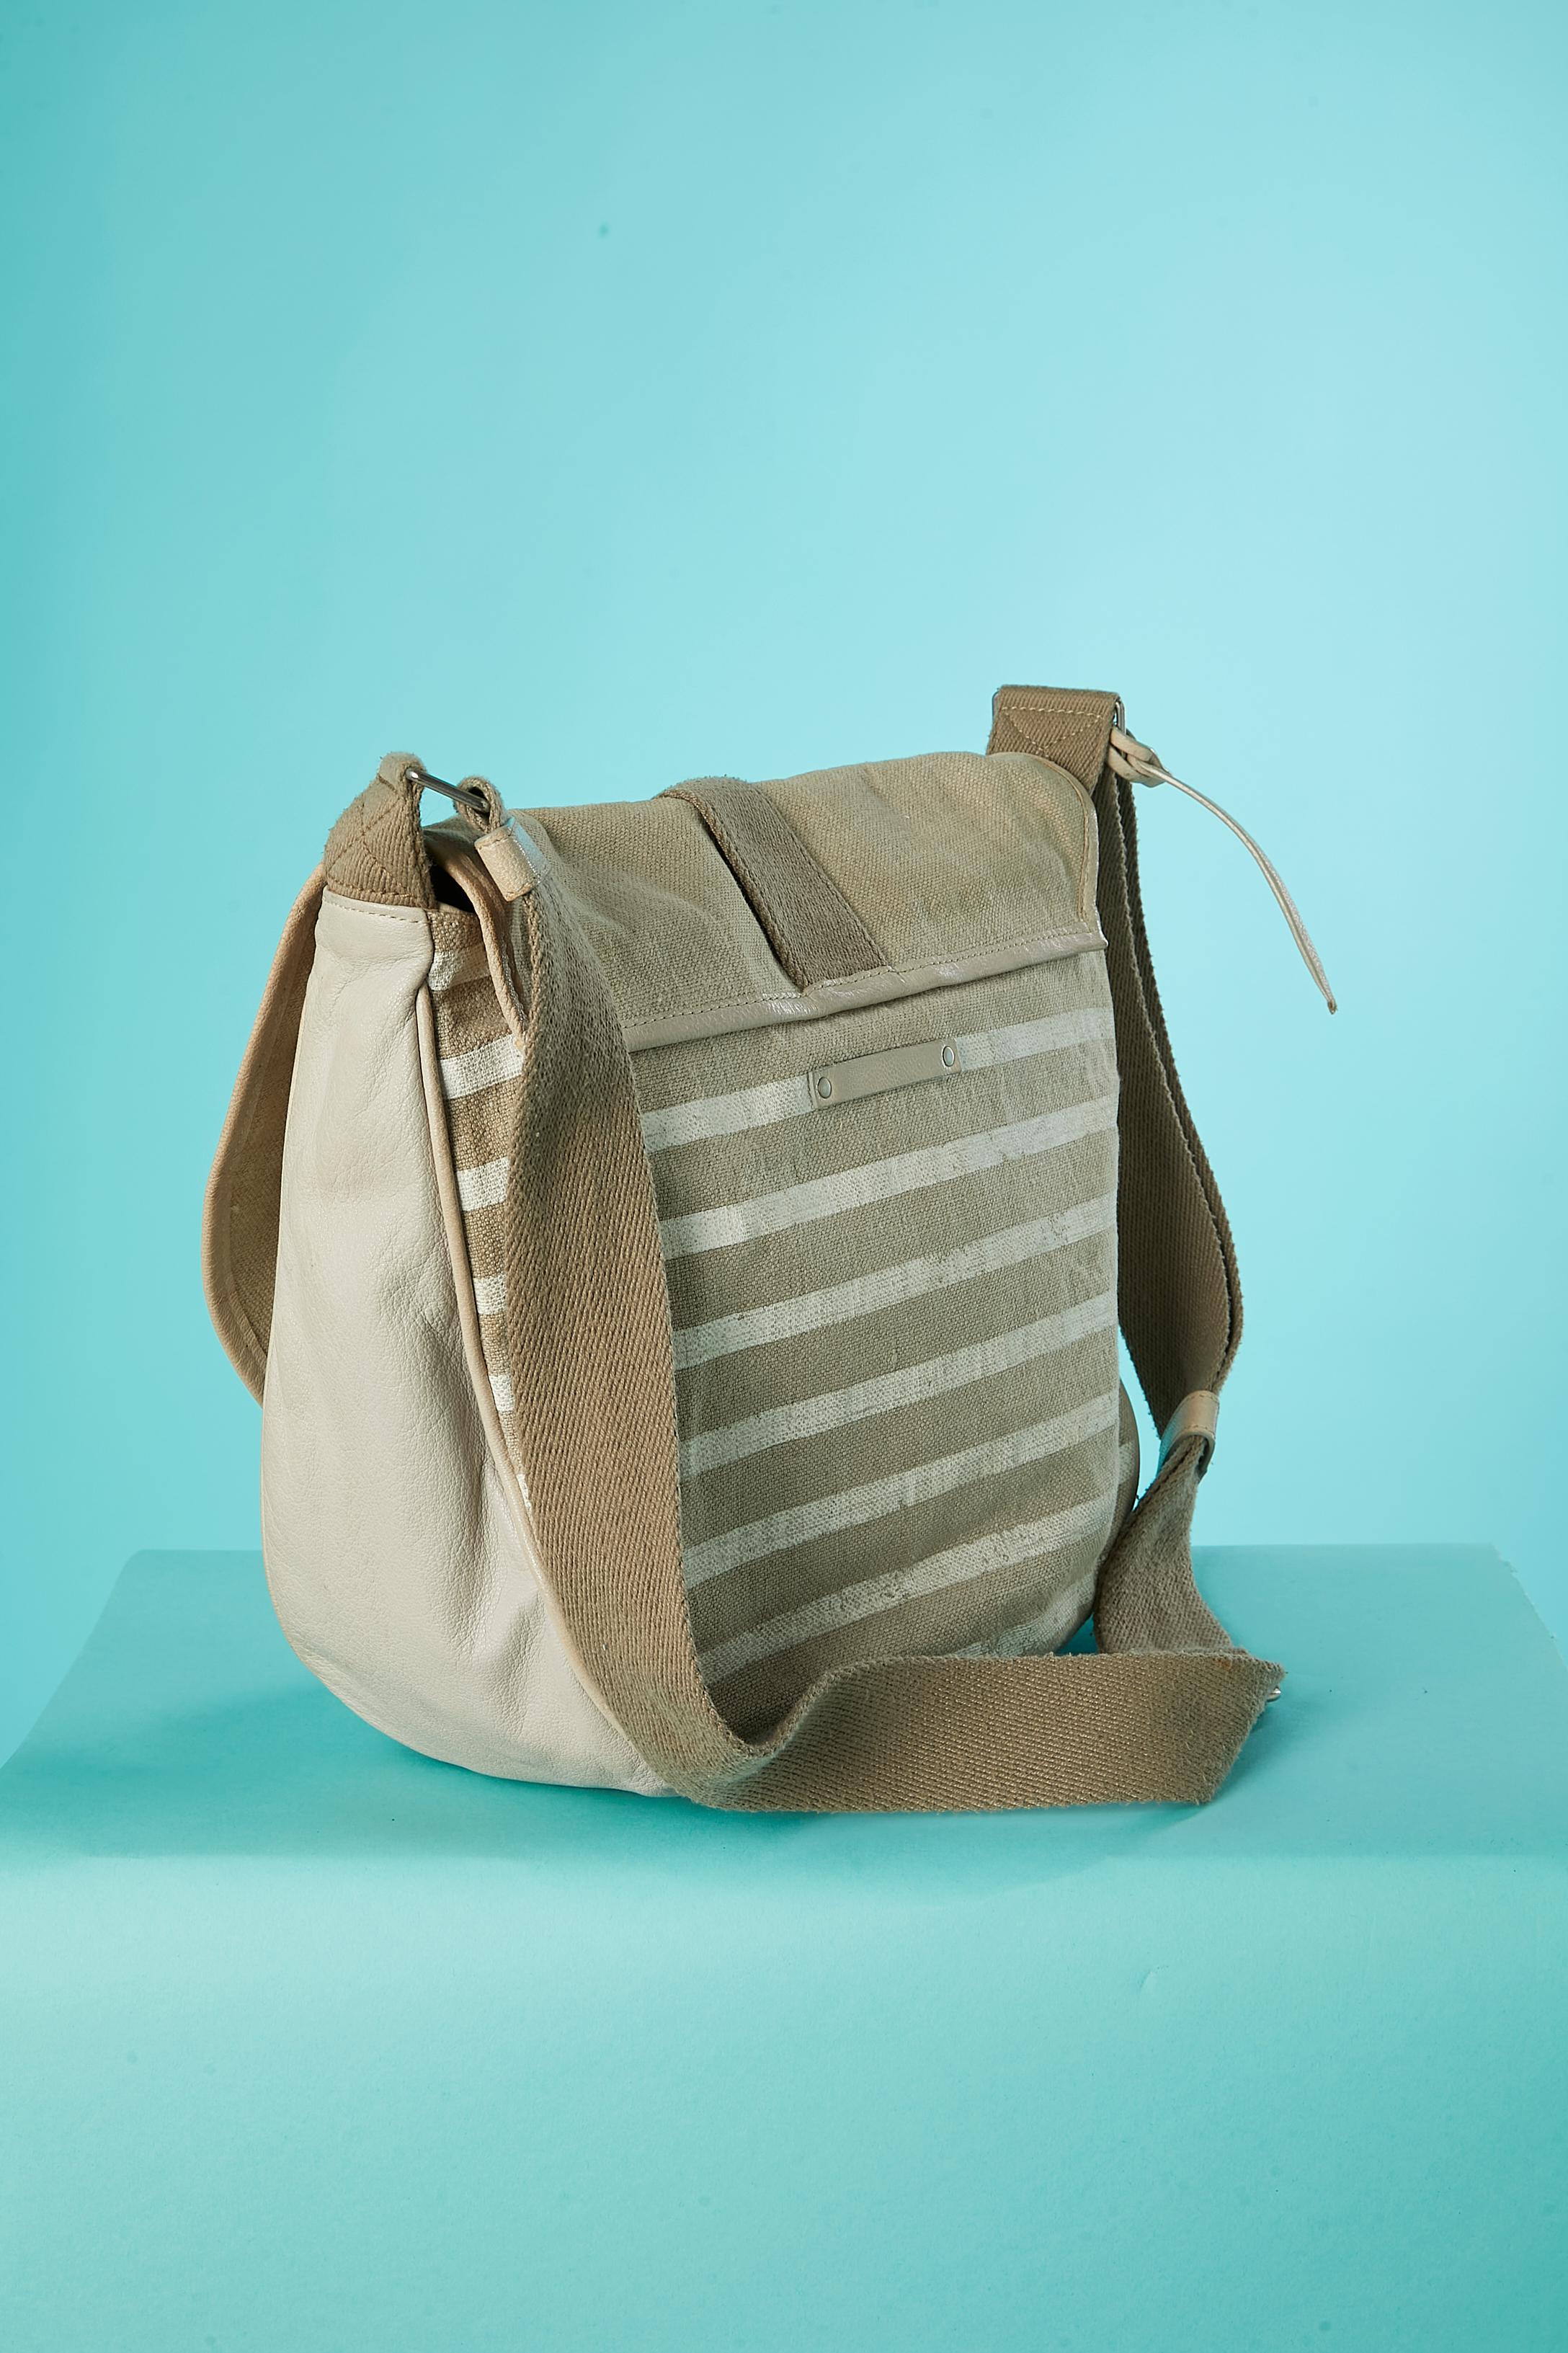 Beige and striped cotton and leather cross-body bag. Branded nylon lining. One large inside pocket with zip and 2 flat pockets. Pencil stain on the lining and one stain on the shoulder strap. 
SIZE: 30 cm X 30 cm X 12 cm 
Adjustable shoulder strap: